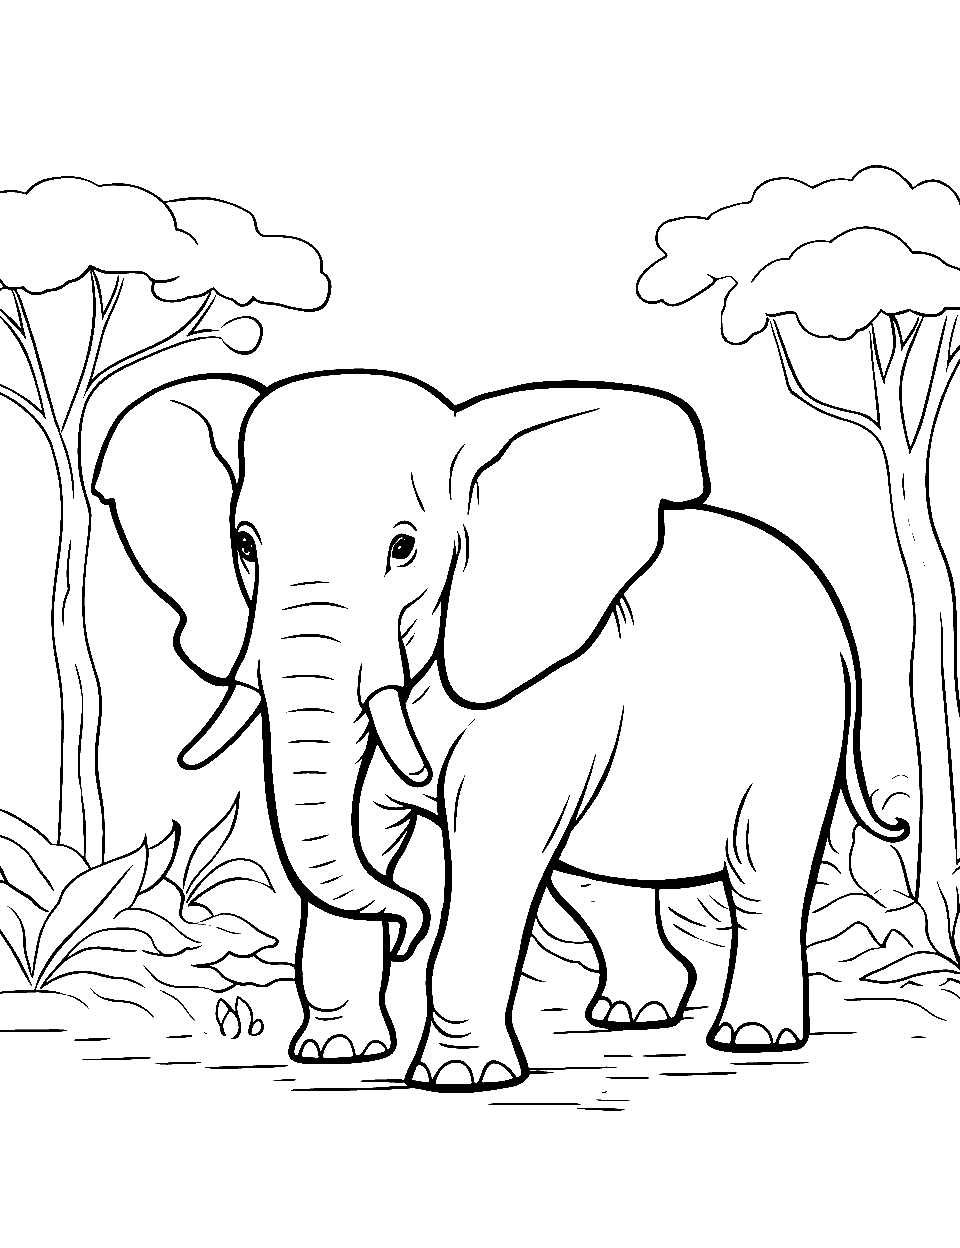 The Elephant And The Tailor Story For Children With Moral